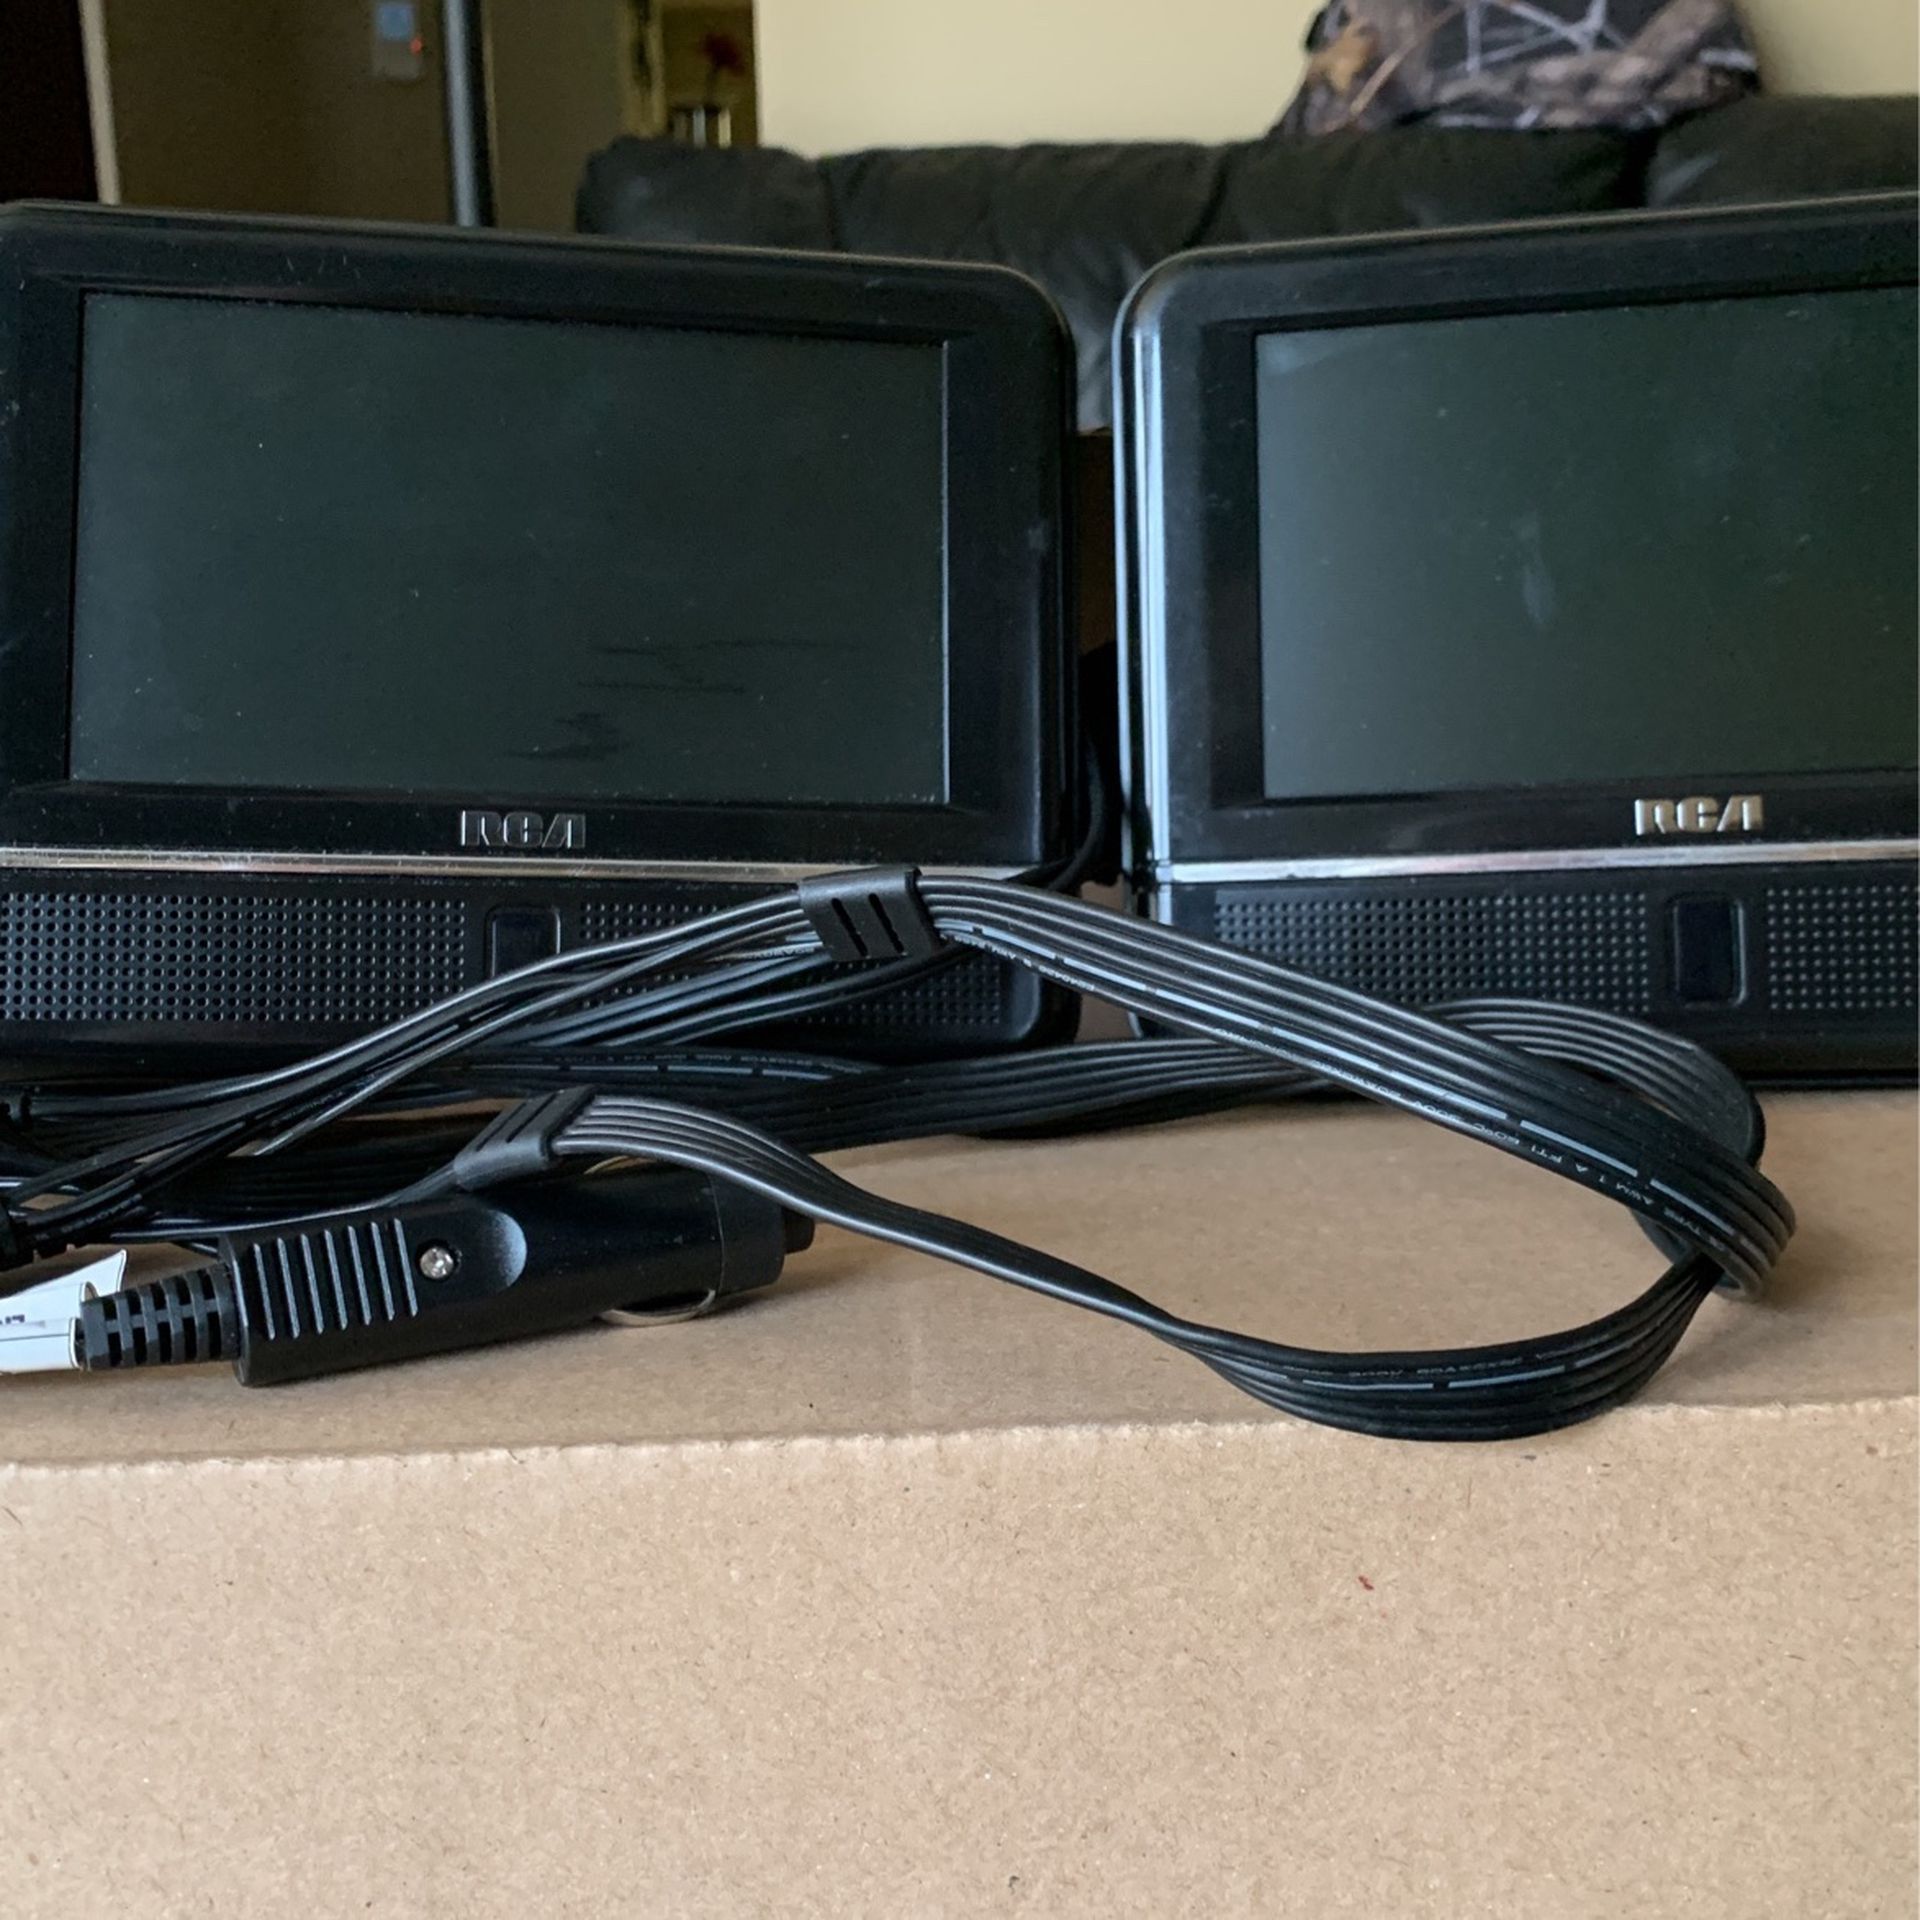 Potable DVD Player And Extra Monitor Car Power Cord Plus